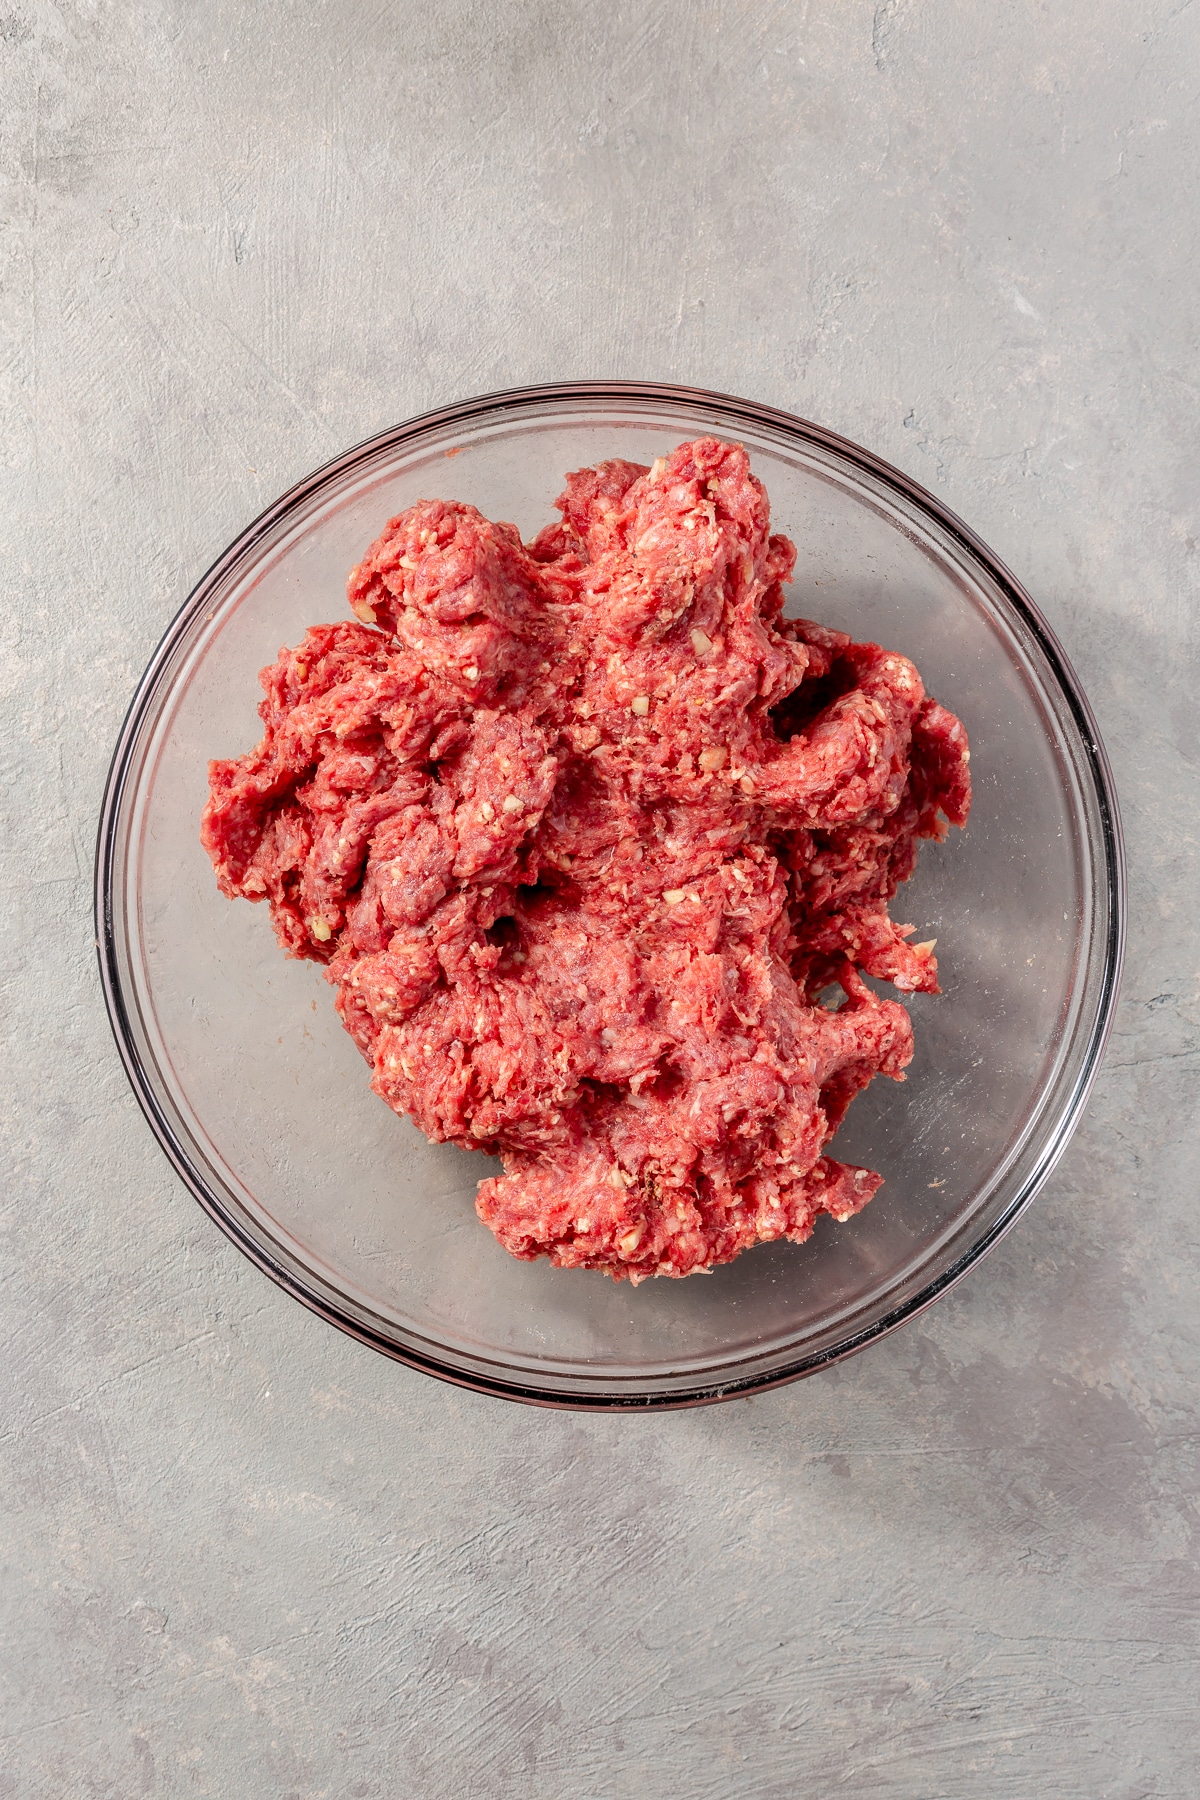 A variety of ingredients have been mixed into the ground beef.